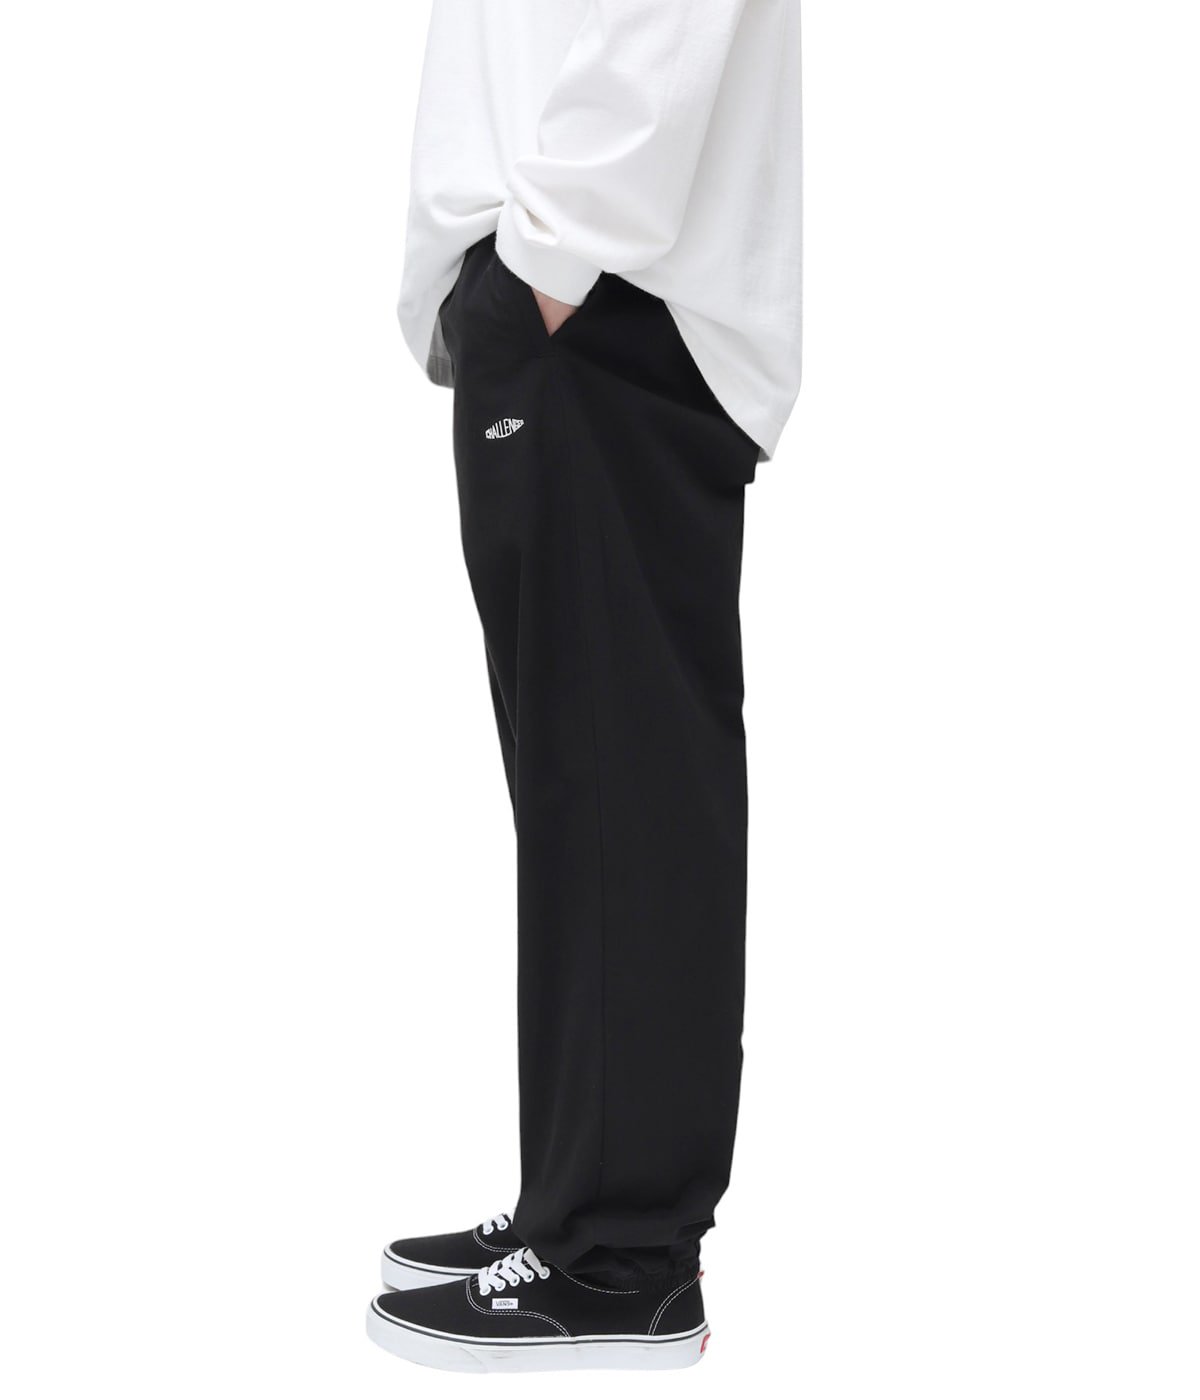 23aw CHALLENGER MILITARY WARM UP PANTS - パンツ